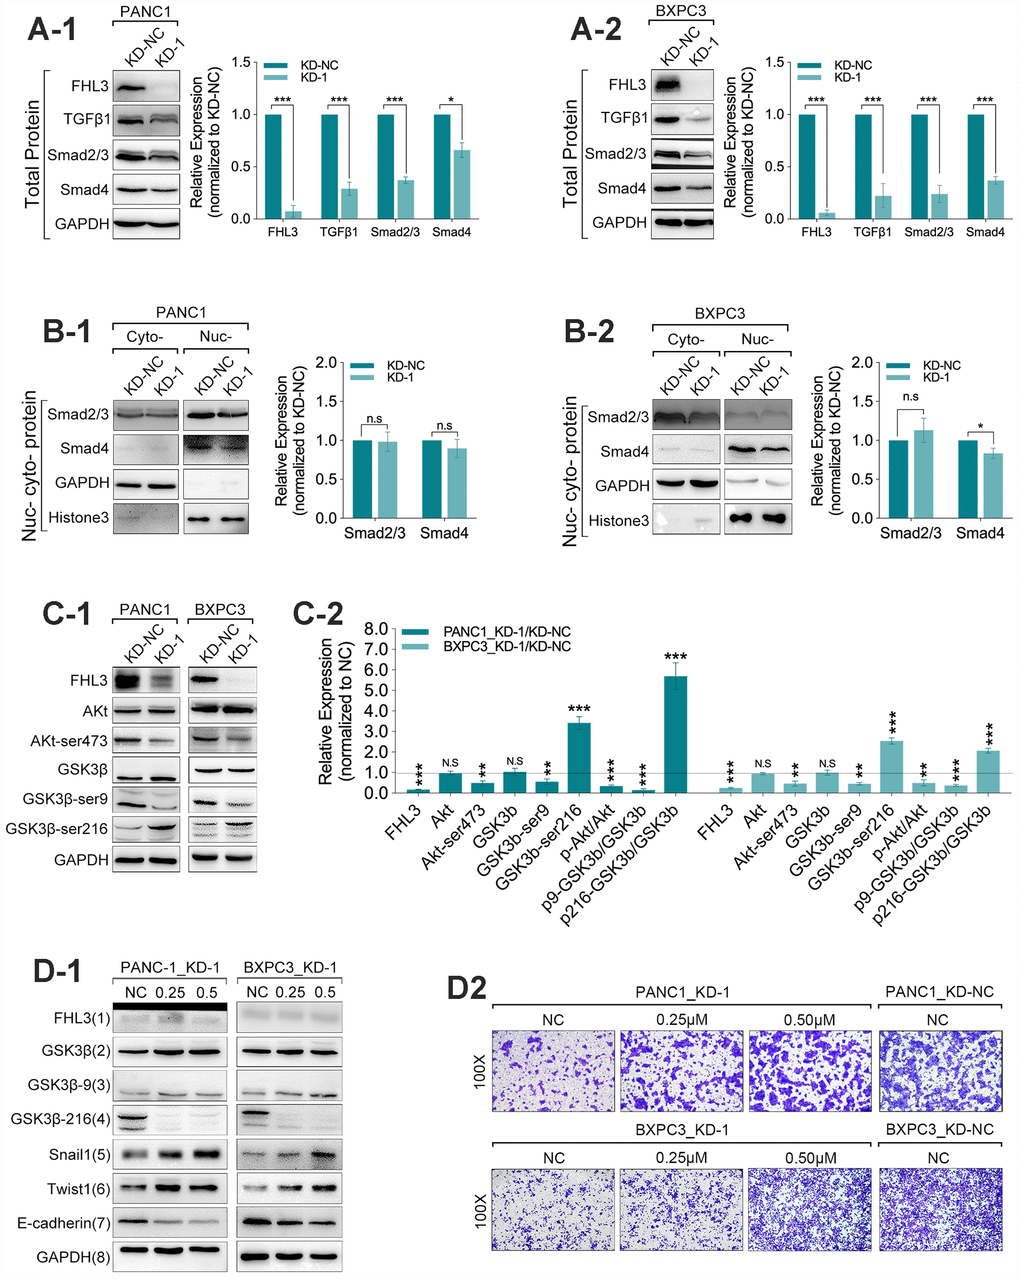 FHL3 regulated EMT mainly by TGFβ1/Akt/GSK3β/ubiquitin pathway. (A1 and A2) WB assay showed FHL3 knockdown made downregulation of TGFβ1, smad2/3, and smad4 in PANC1